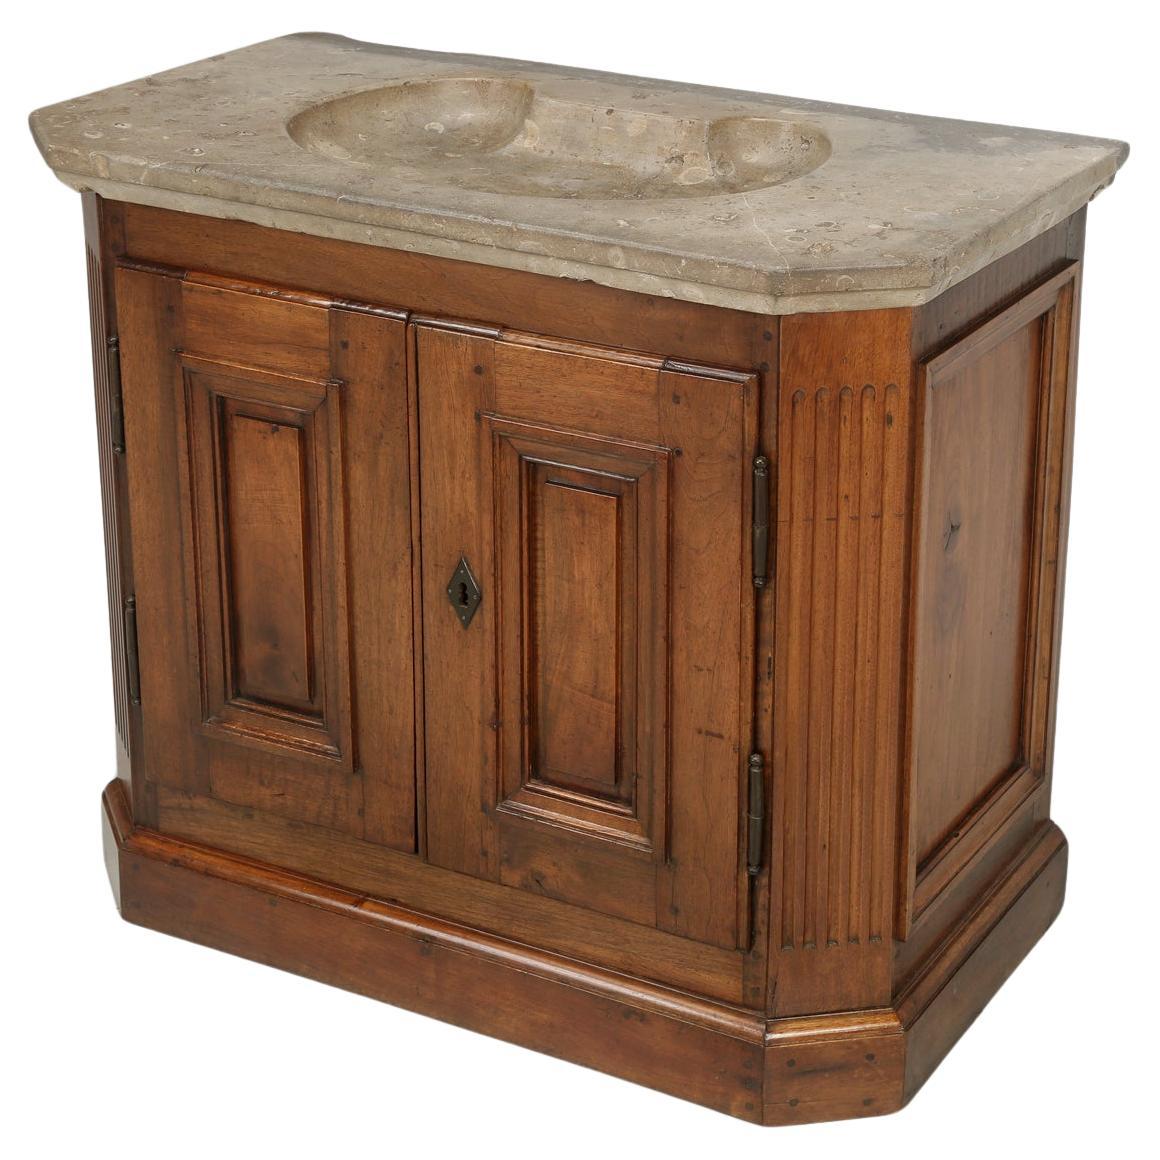 Antique French 18th C Spectacular Walnut Bathroom Vanity with Thick Fossil Sink For Sale